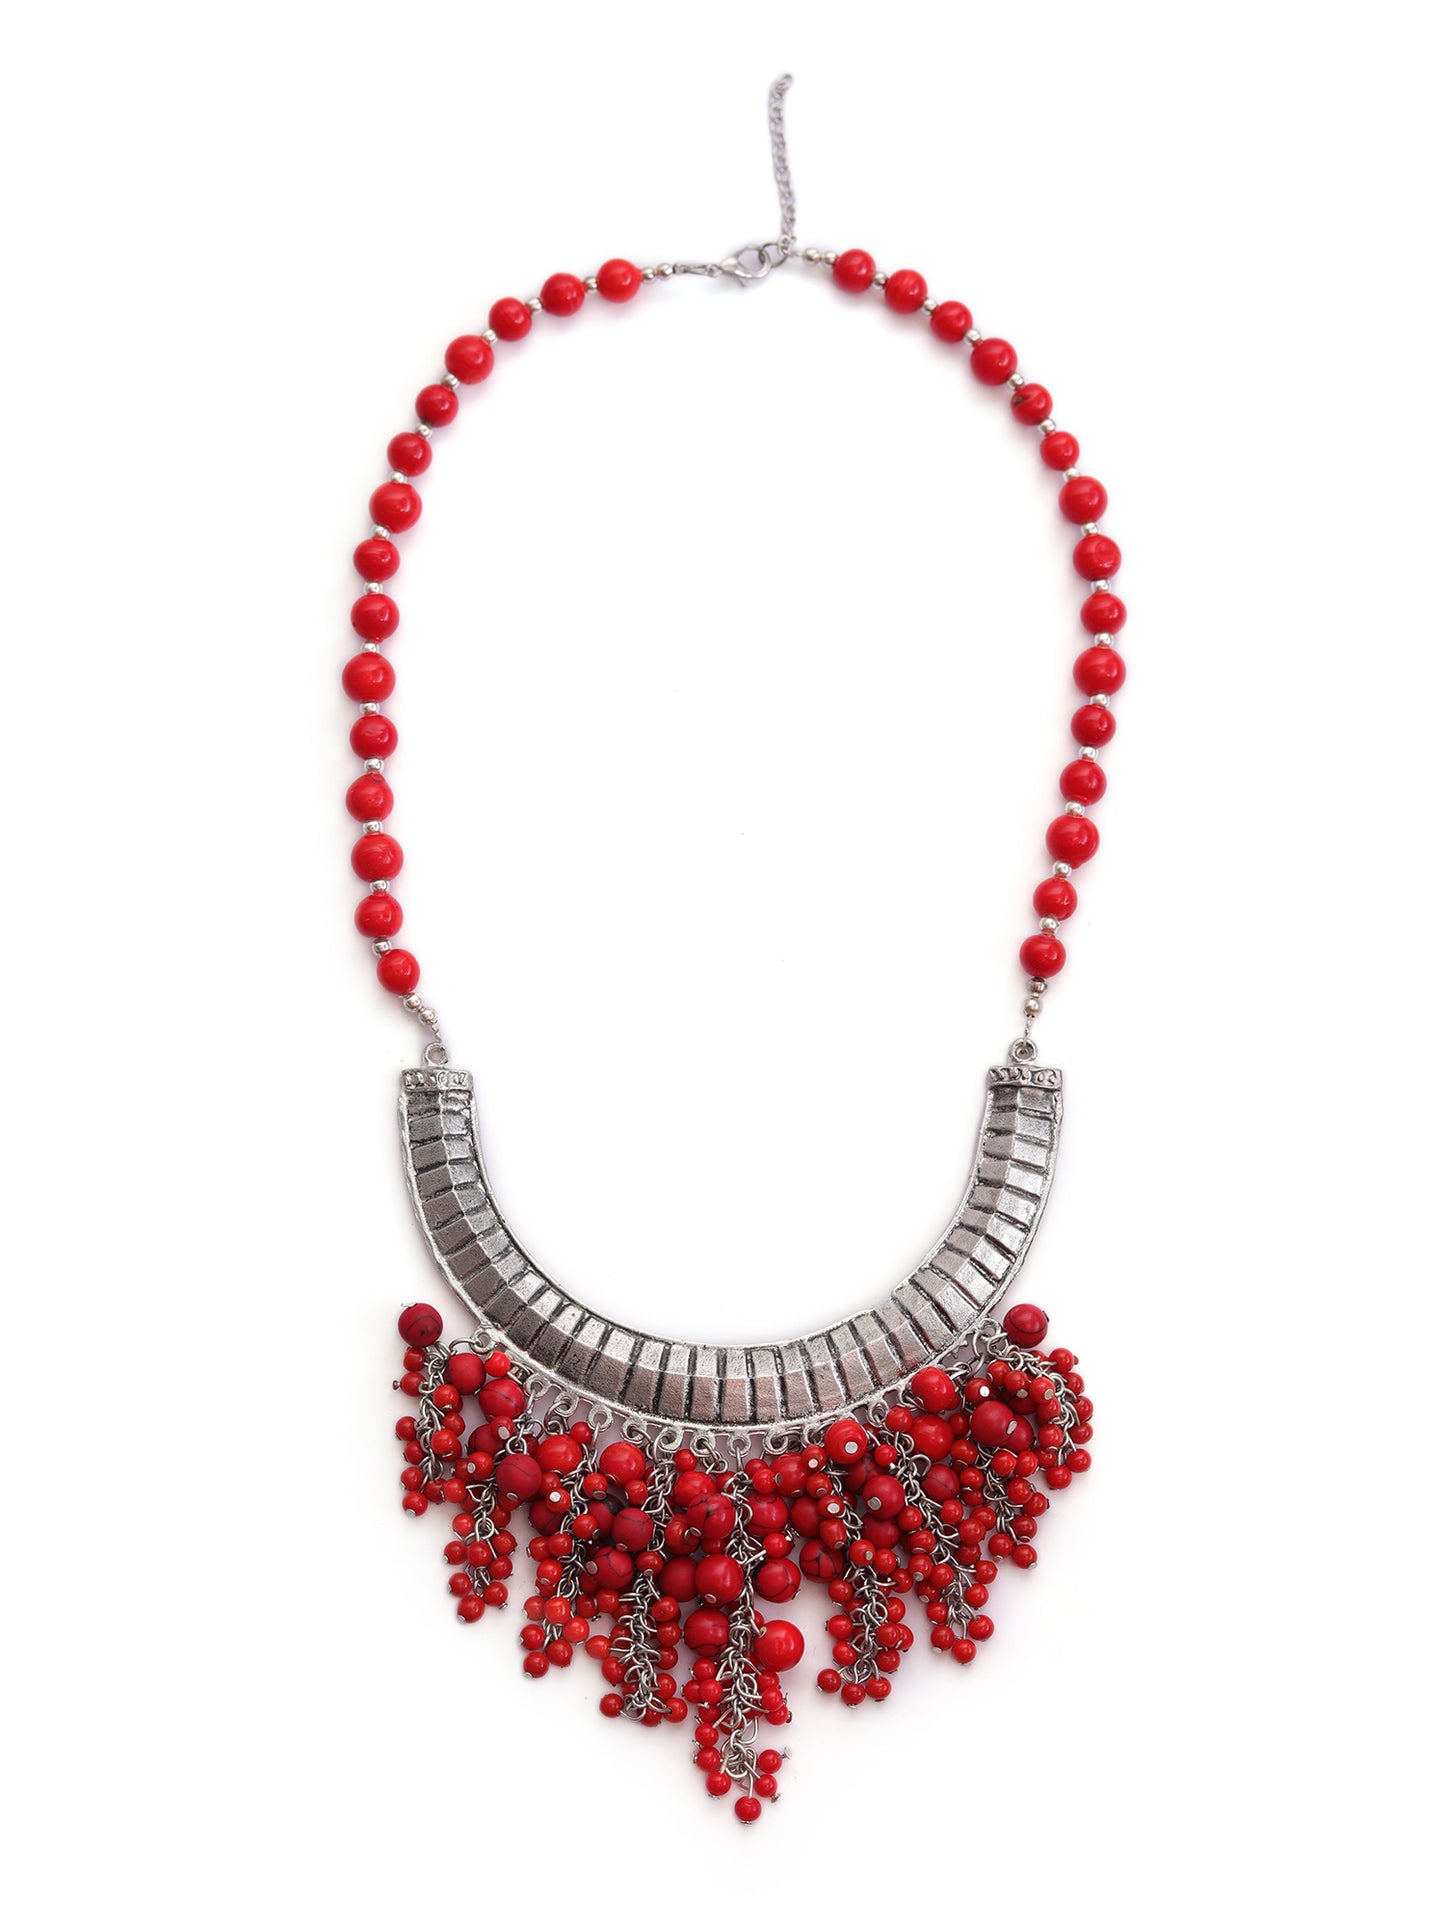 The Hasli Red Beaded Panicle Necklace